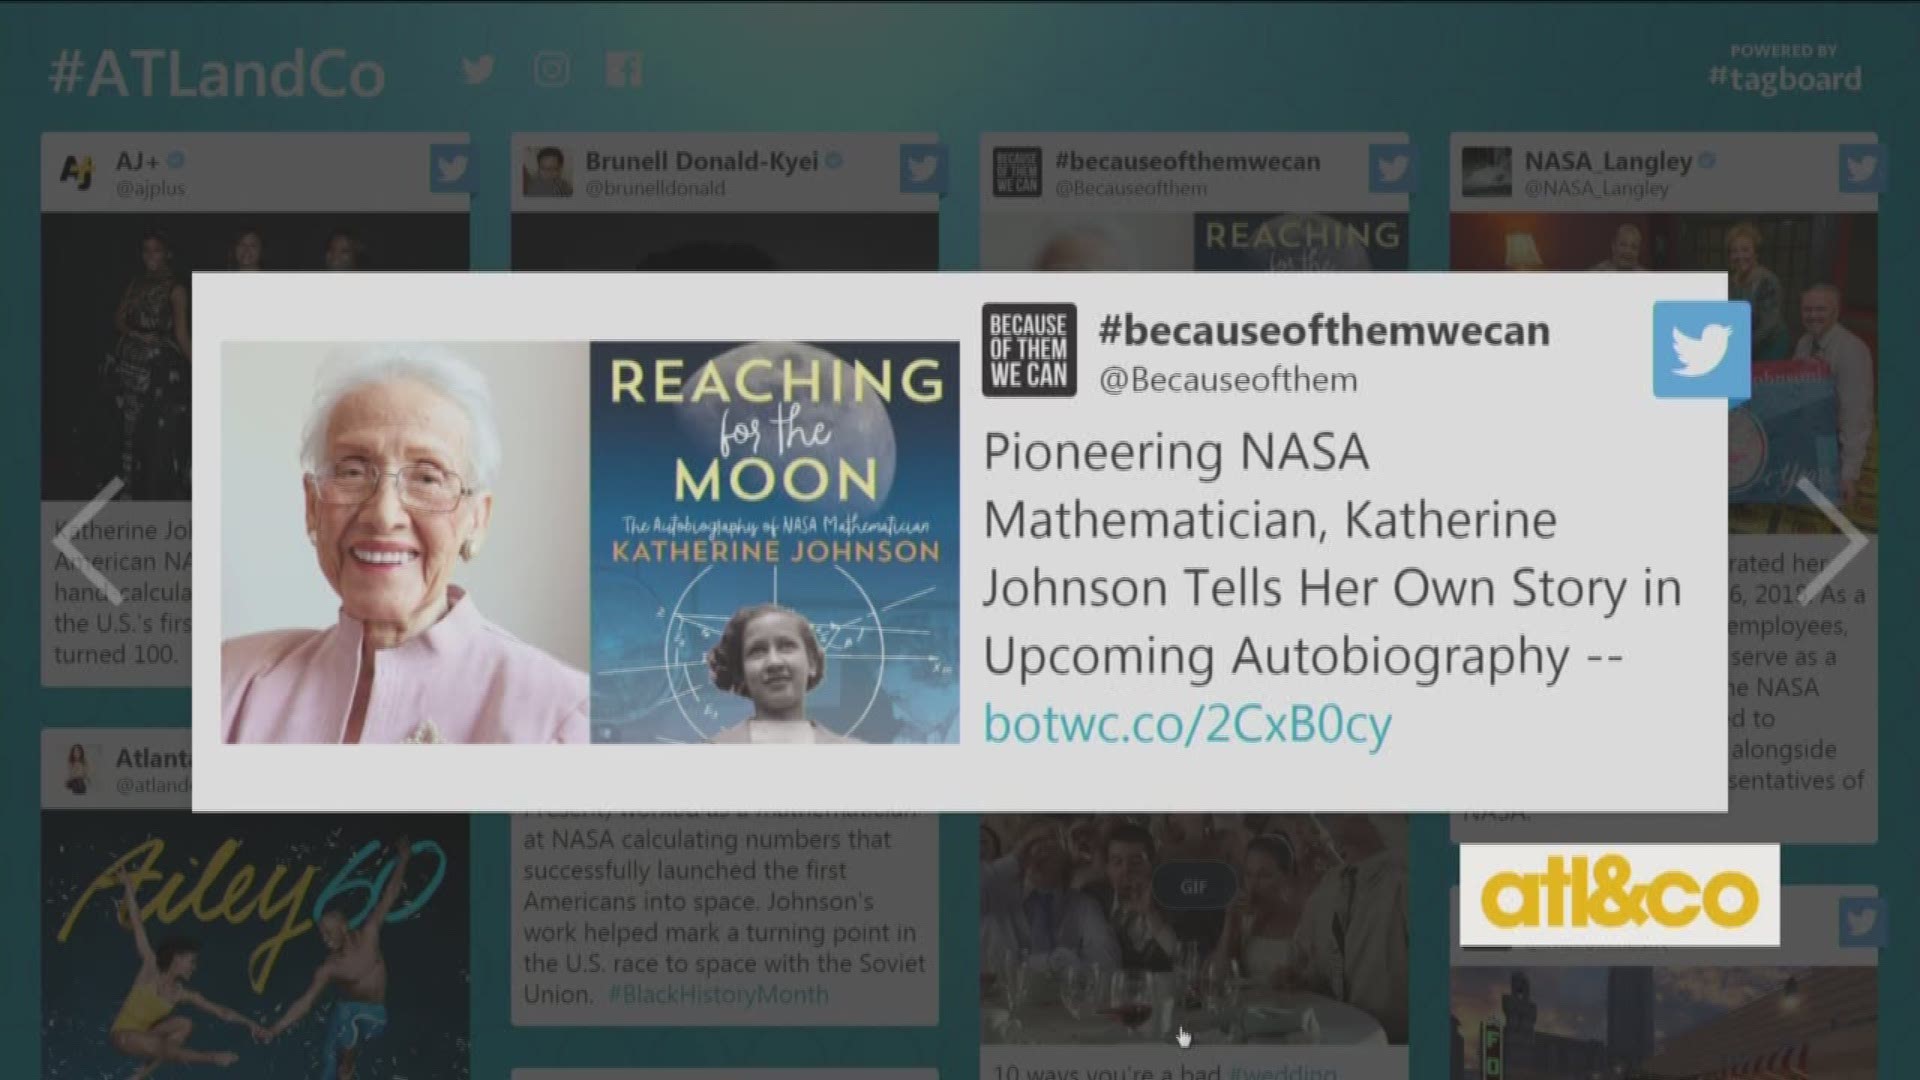 NASA mathematician Katherine Johnson was critical in the success of the first and later U.S. spaceflights.